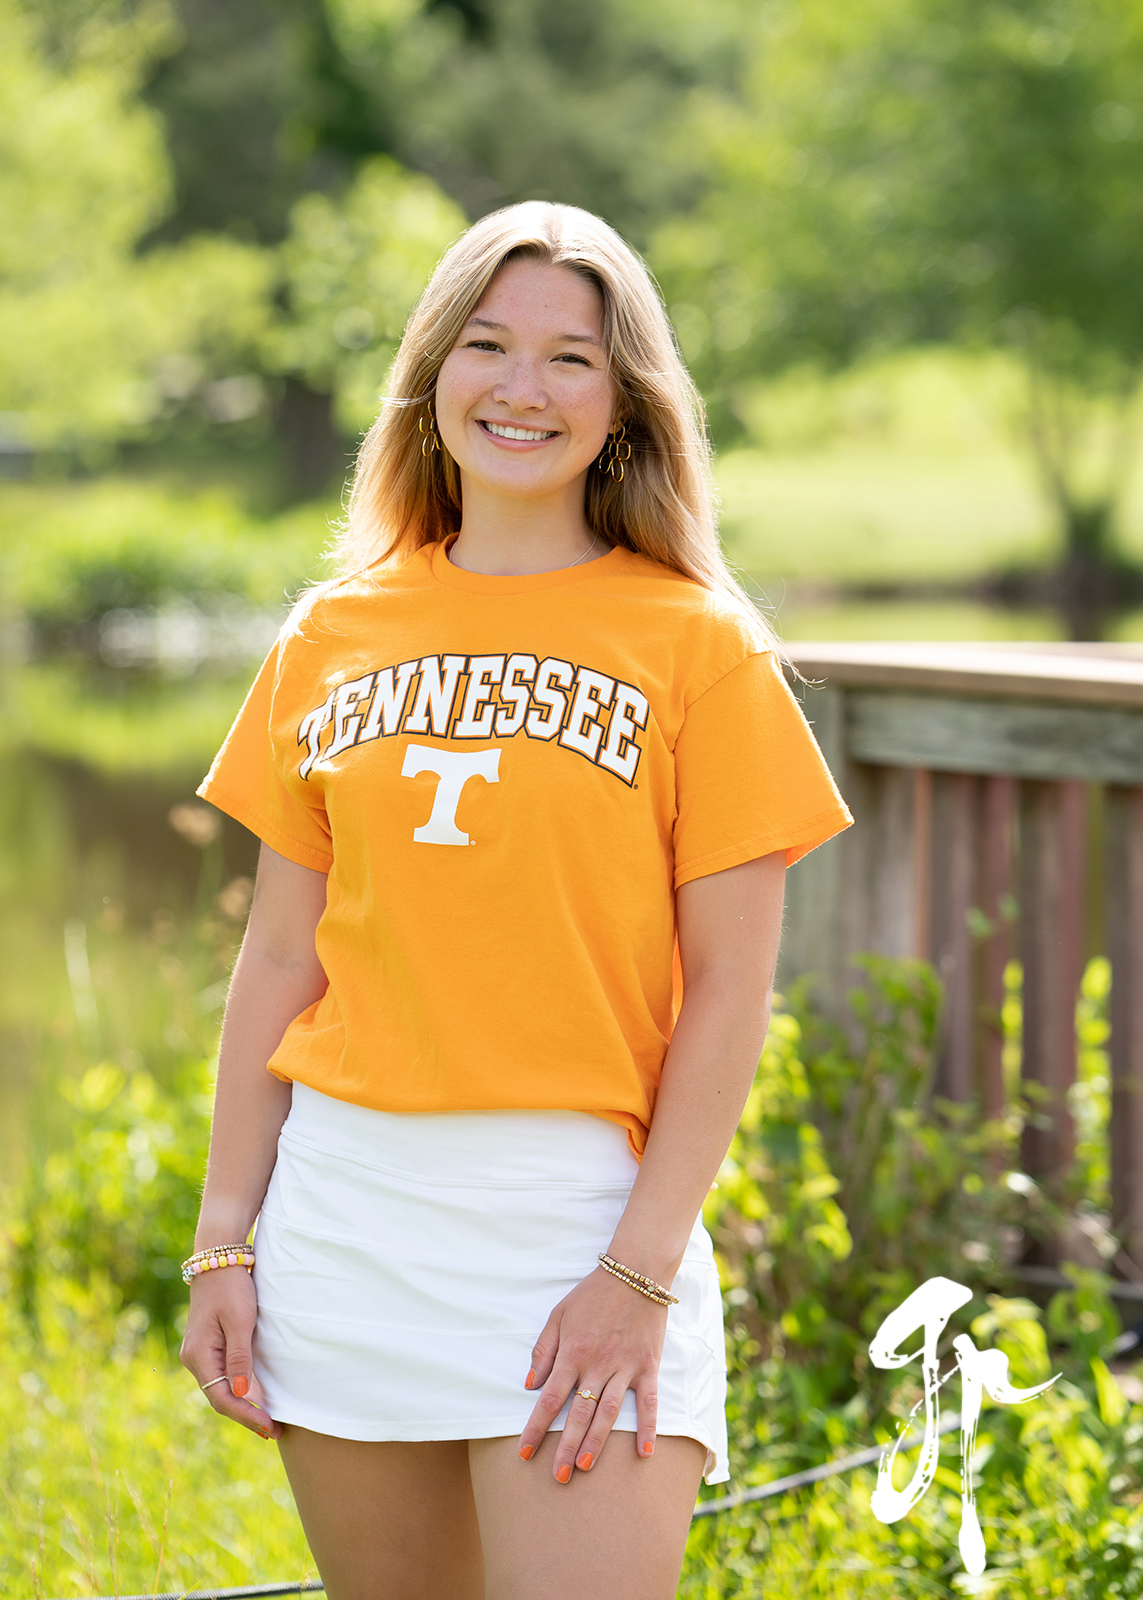 high school senior photoshoot with Tennessee t-shirt
